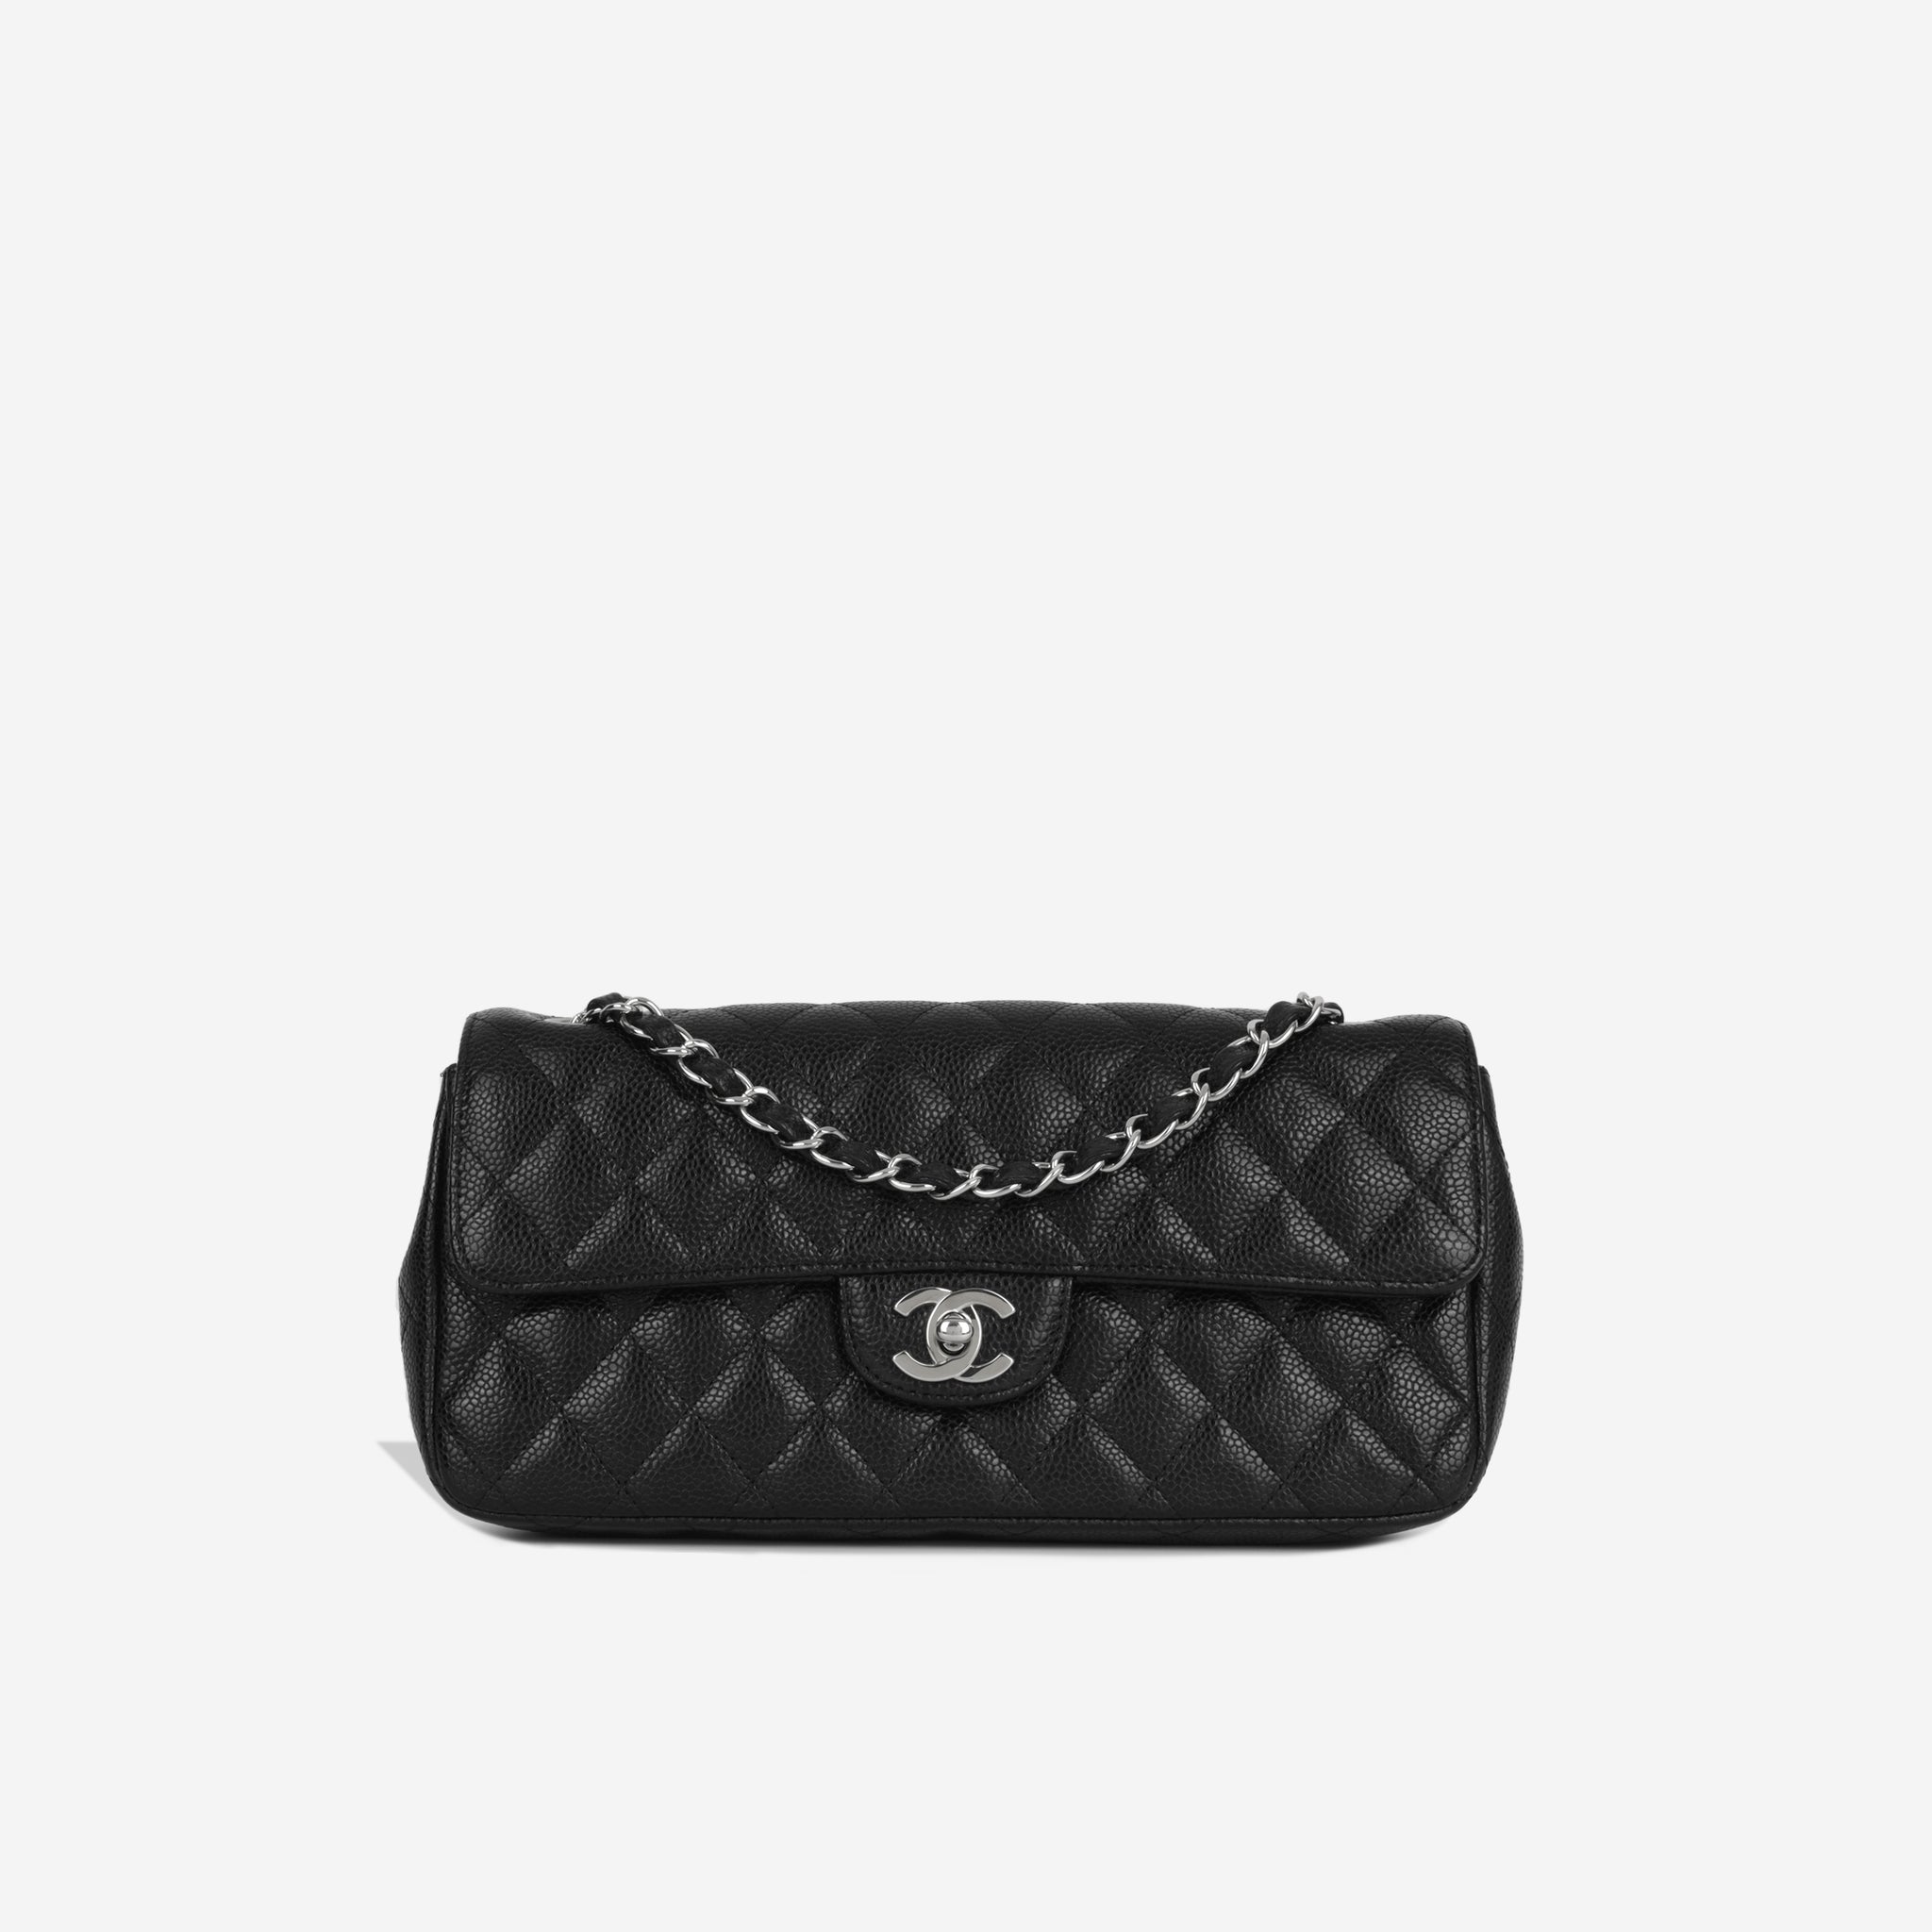 Chanel iconic bags accessories and clothes to own  The Peak Magazine